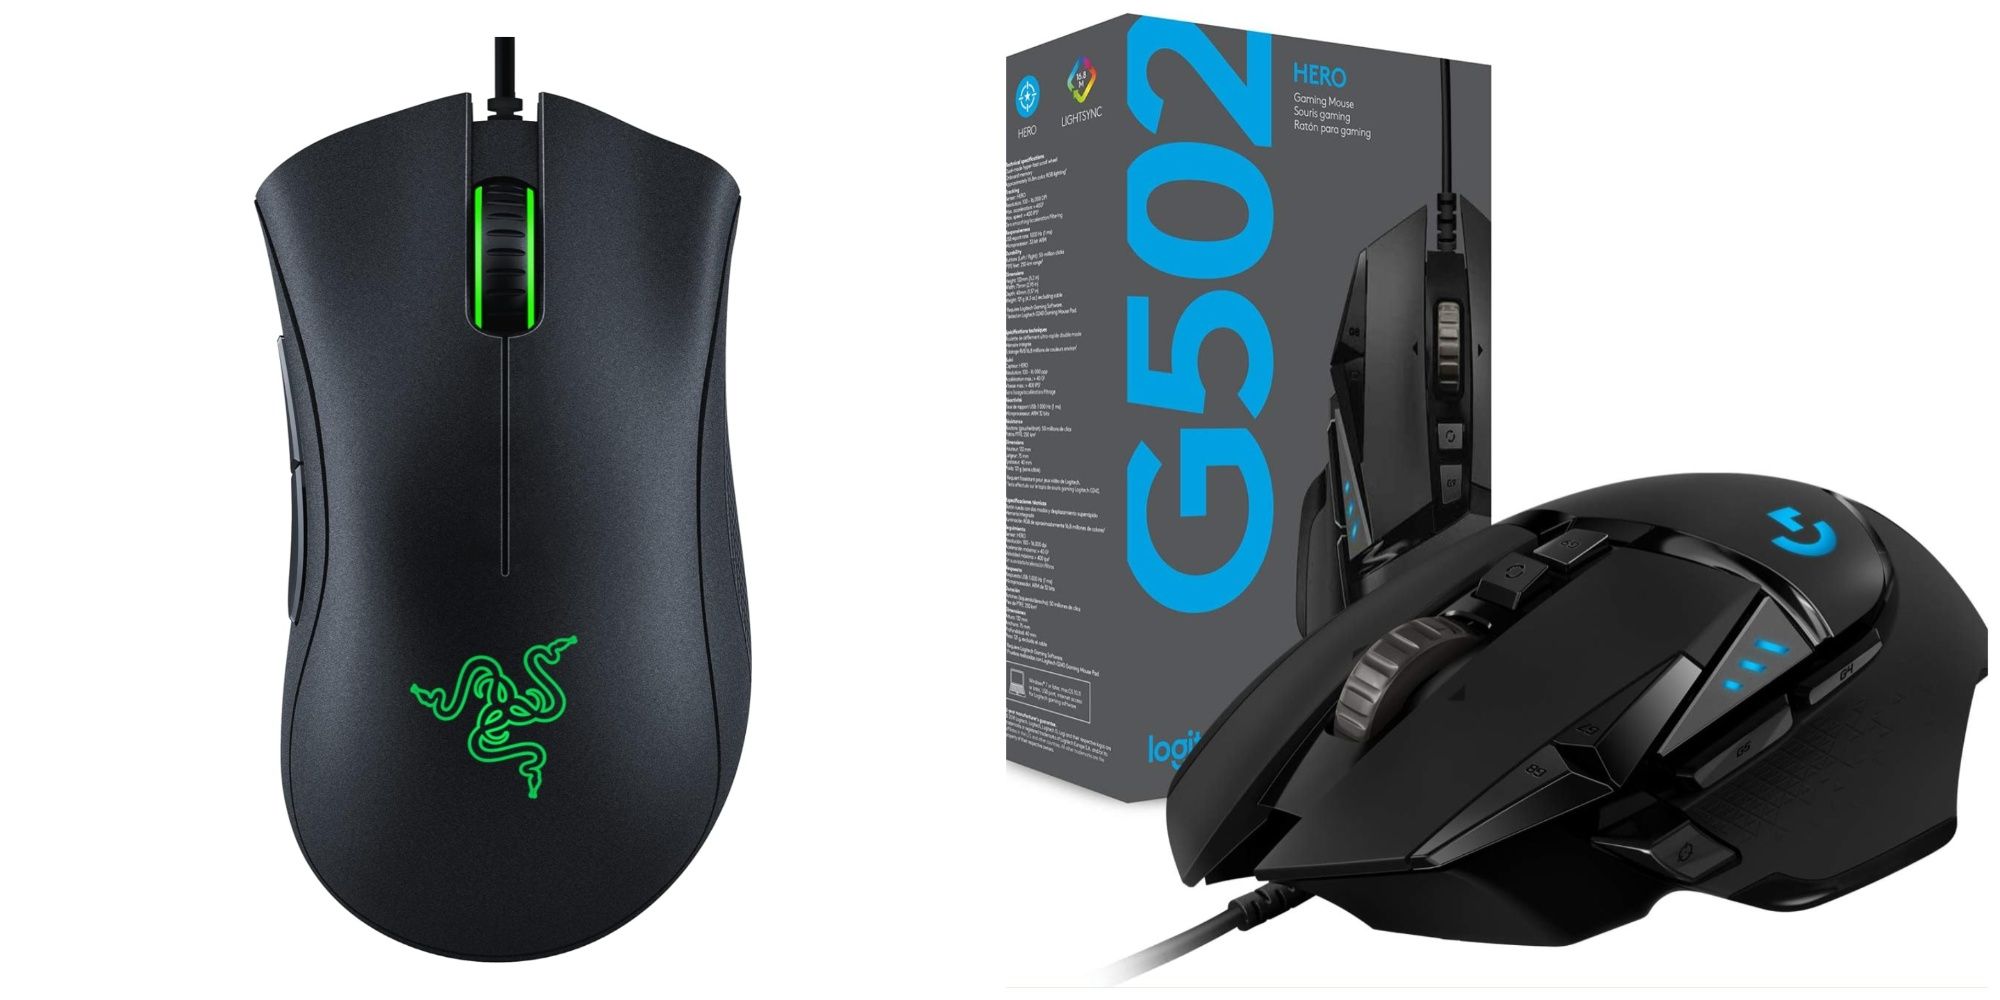 Two budget gaming mice side by side - the Razer DeathAdder and the Logitech Hero G502